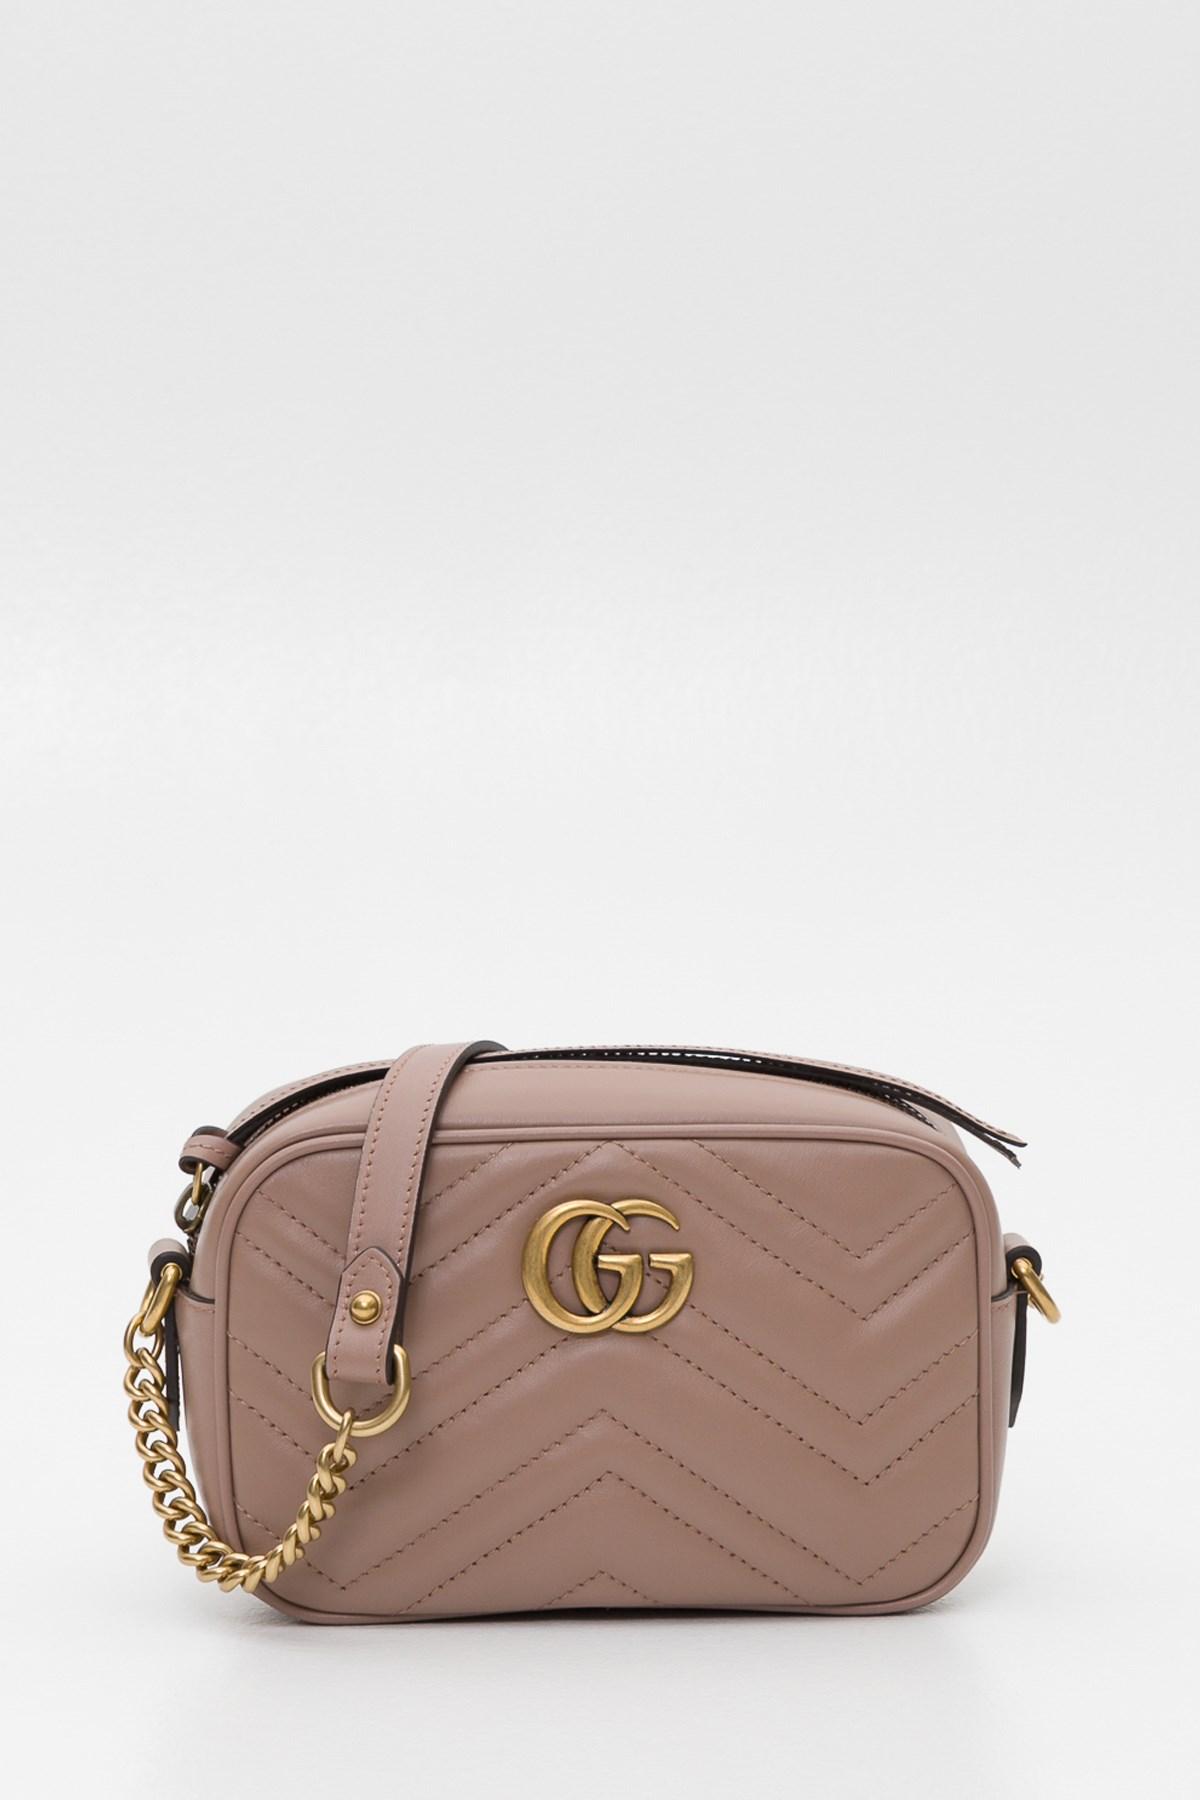 Gucci GG Marmont 2.0 Shoulder Camera Mini Bag In Lion Trap. Ang Chev. Cuore  18 X 12 X 6 Cm in Natural - Lyst